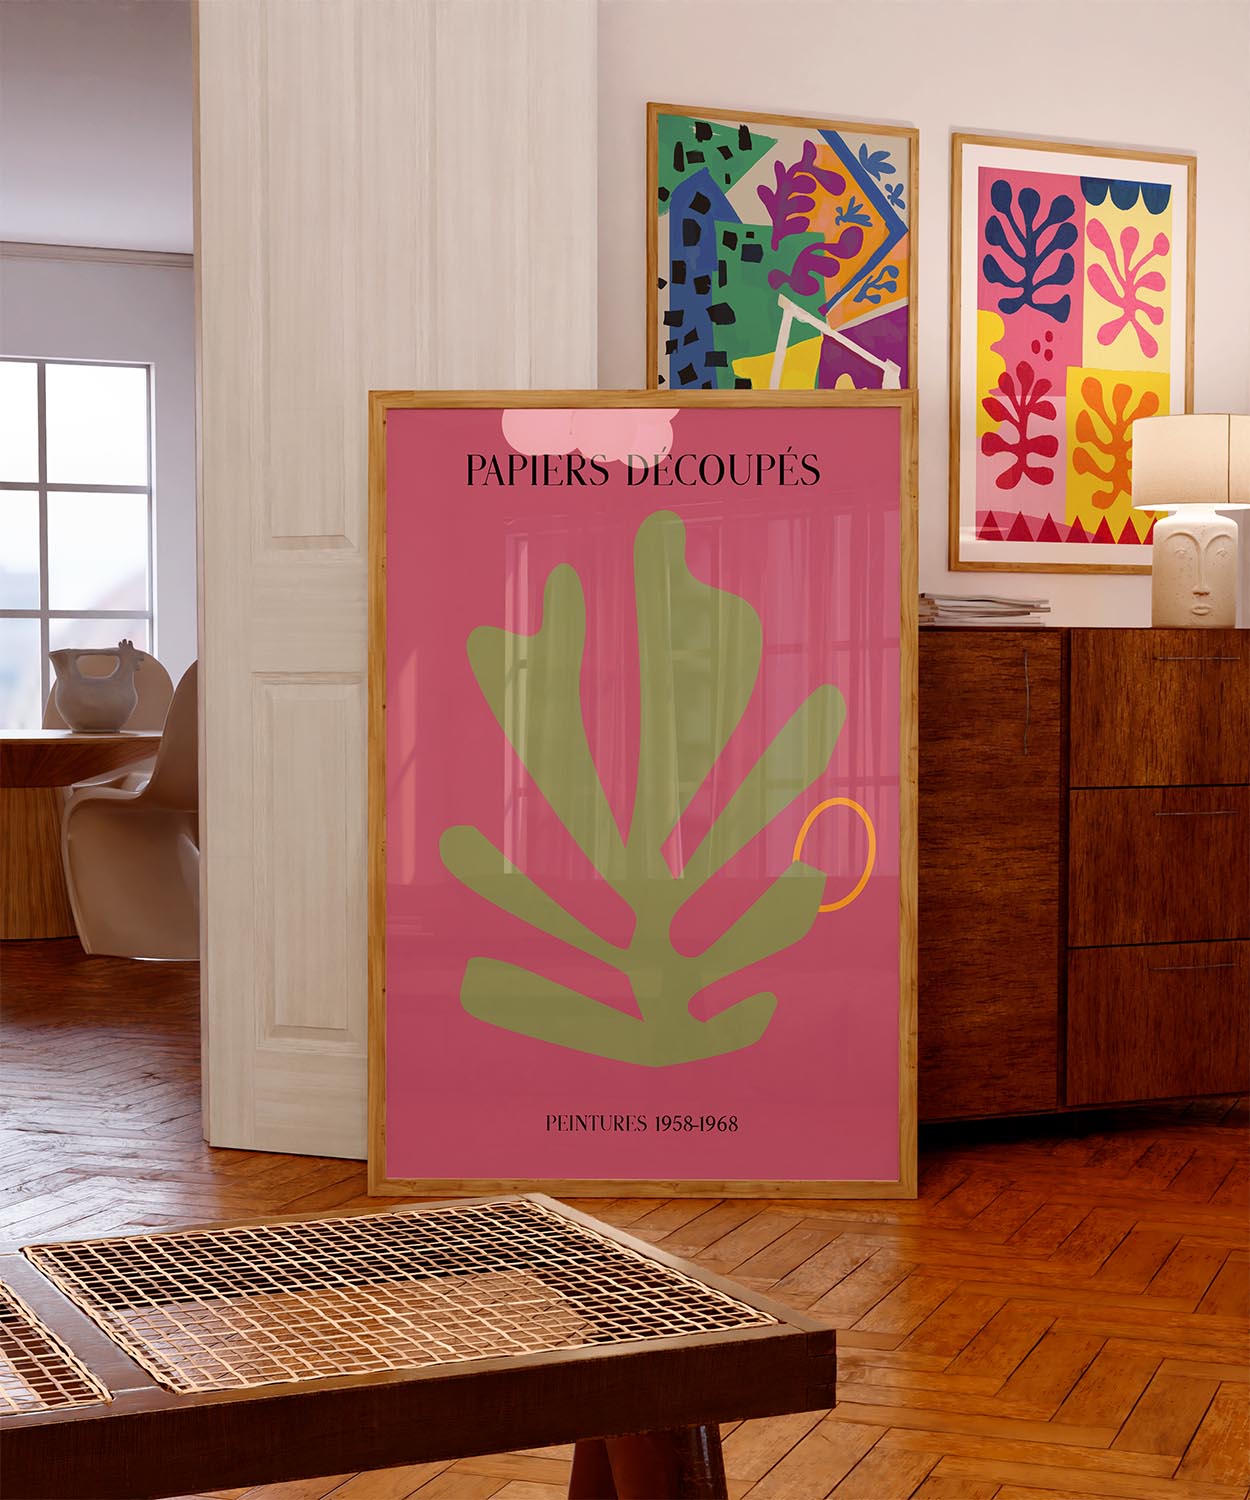 Art poster featuring Matisse-inspired 'Papiers Découpés – The Cut-Outs' in bold green shapes on a vibrant pink background, with 'PEINTURES 1958-1968' text, reflecting the tropical edition of his famed art series.